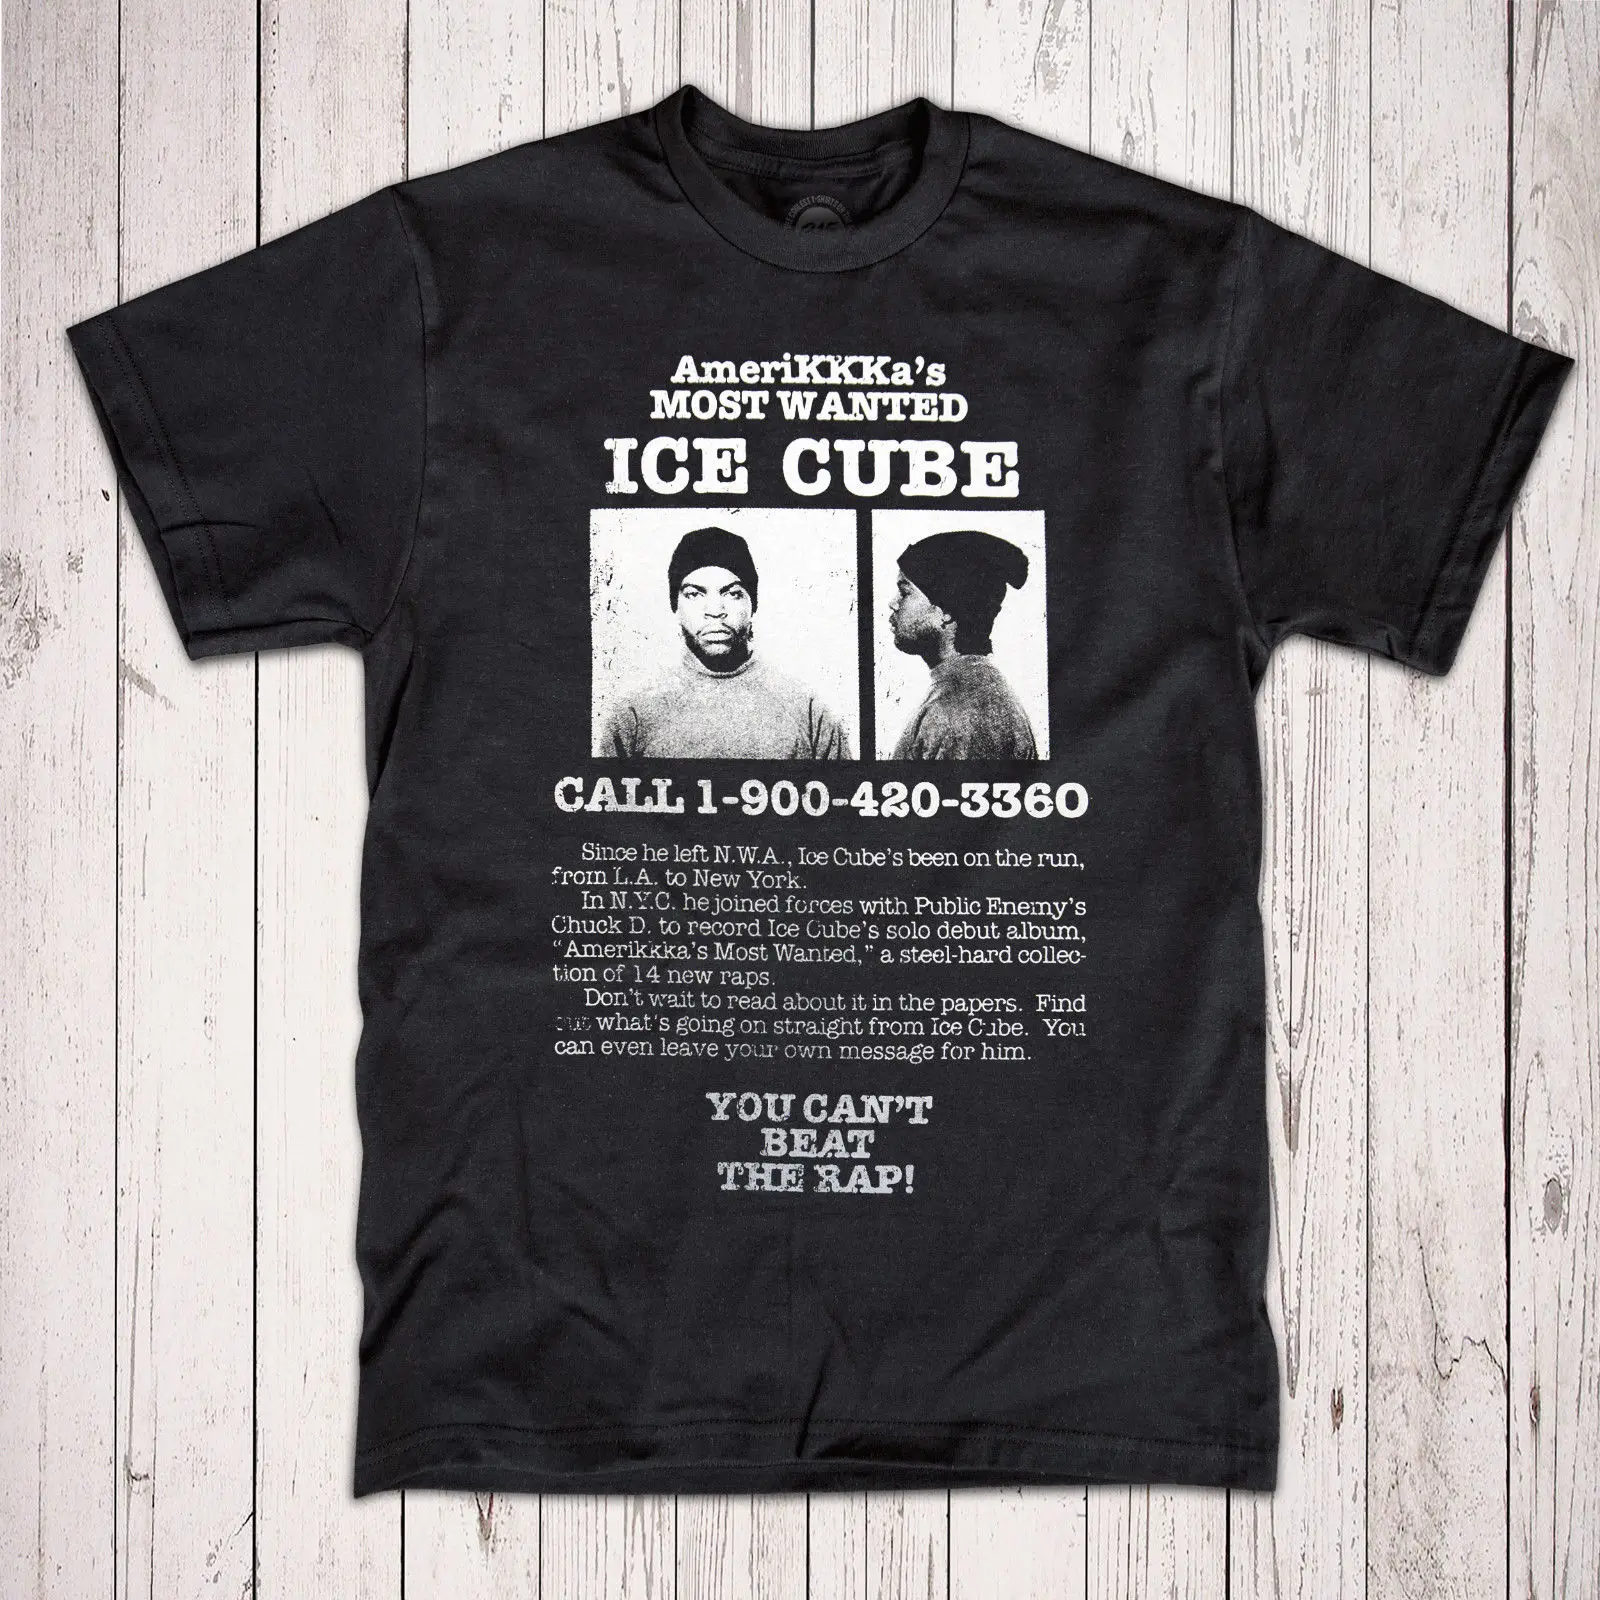 Ice Cube 'Wanted Poster' T-Shirt - Hip Hop Gangsta Rap Legend N.W.A Eazy-E, Dre Funny Tops Tee Casual O Neck T Shirt Size